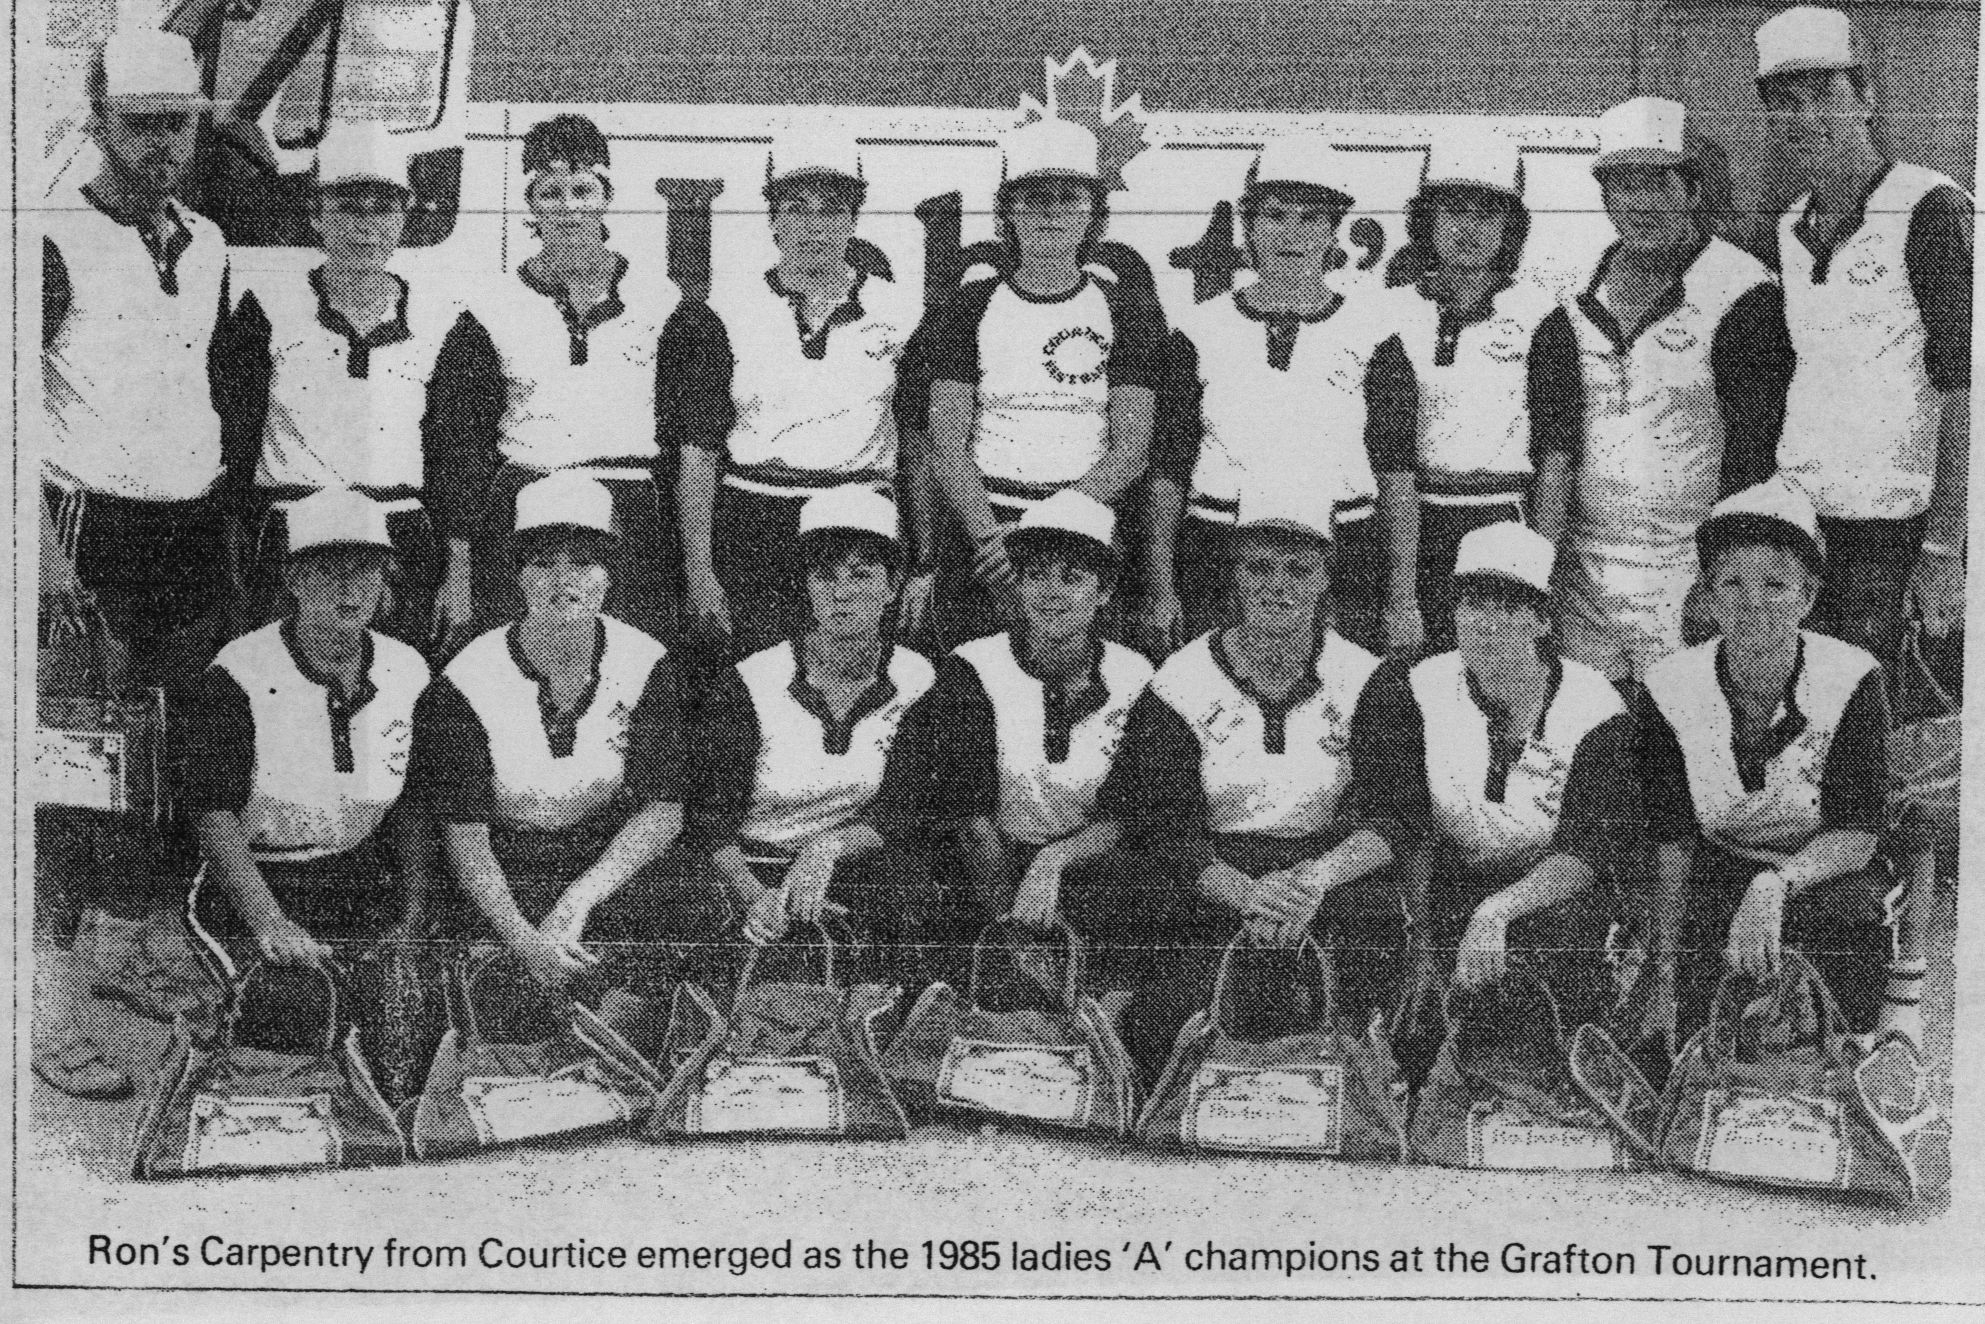 Softball -Grafton Tournament -1985 -Ladies-A Champs-Courtice